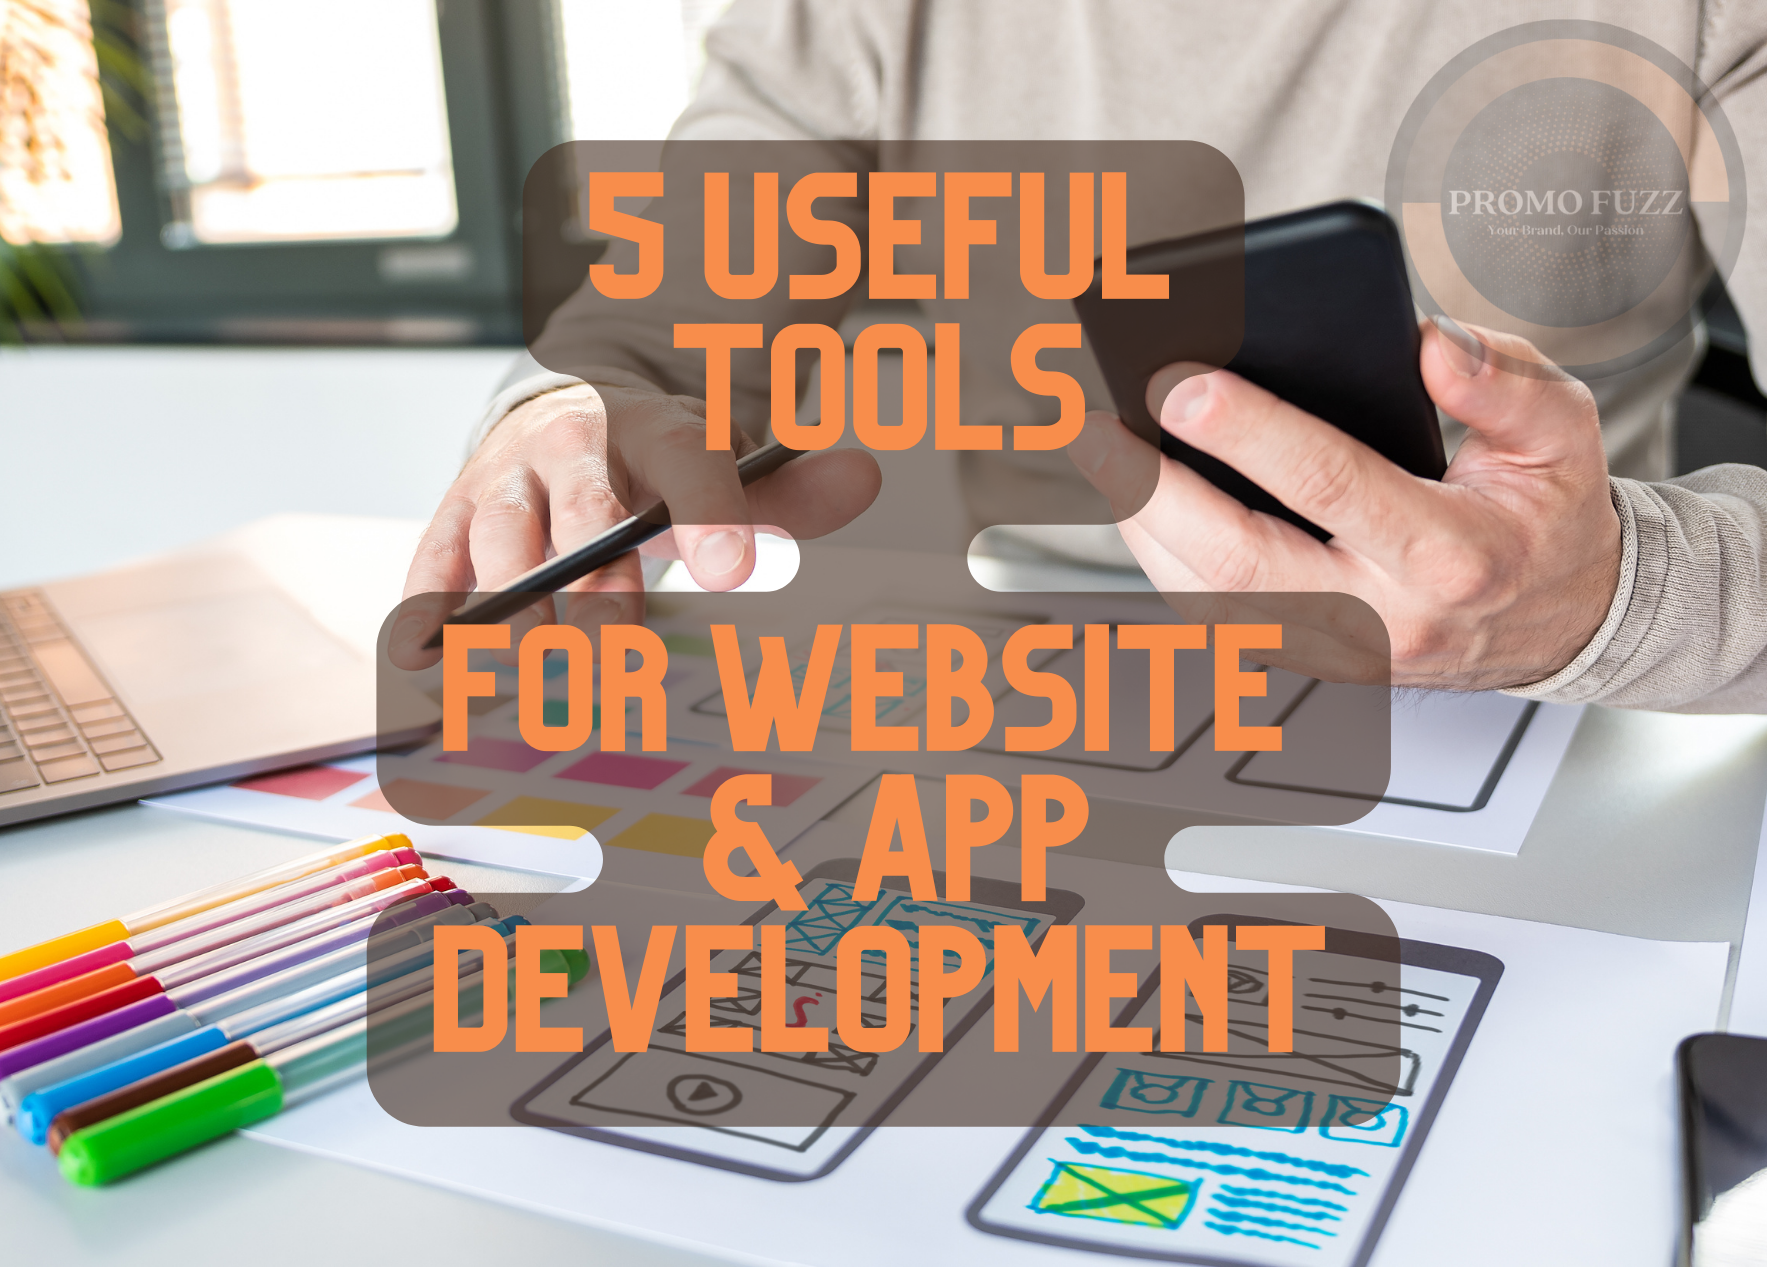 Use these tools for your website or app